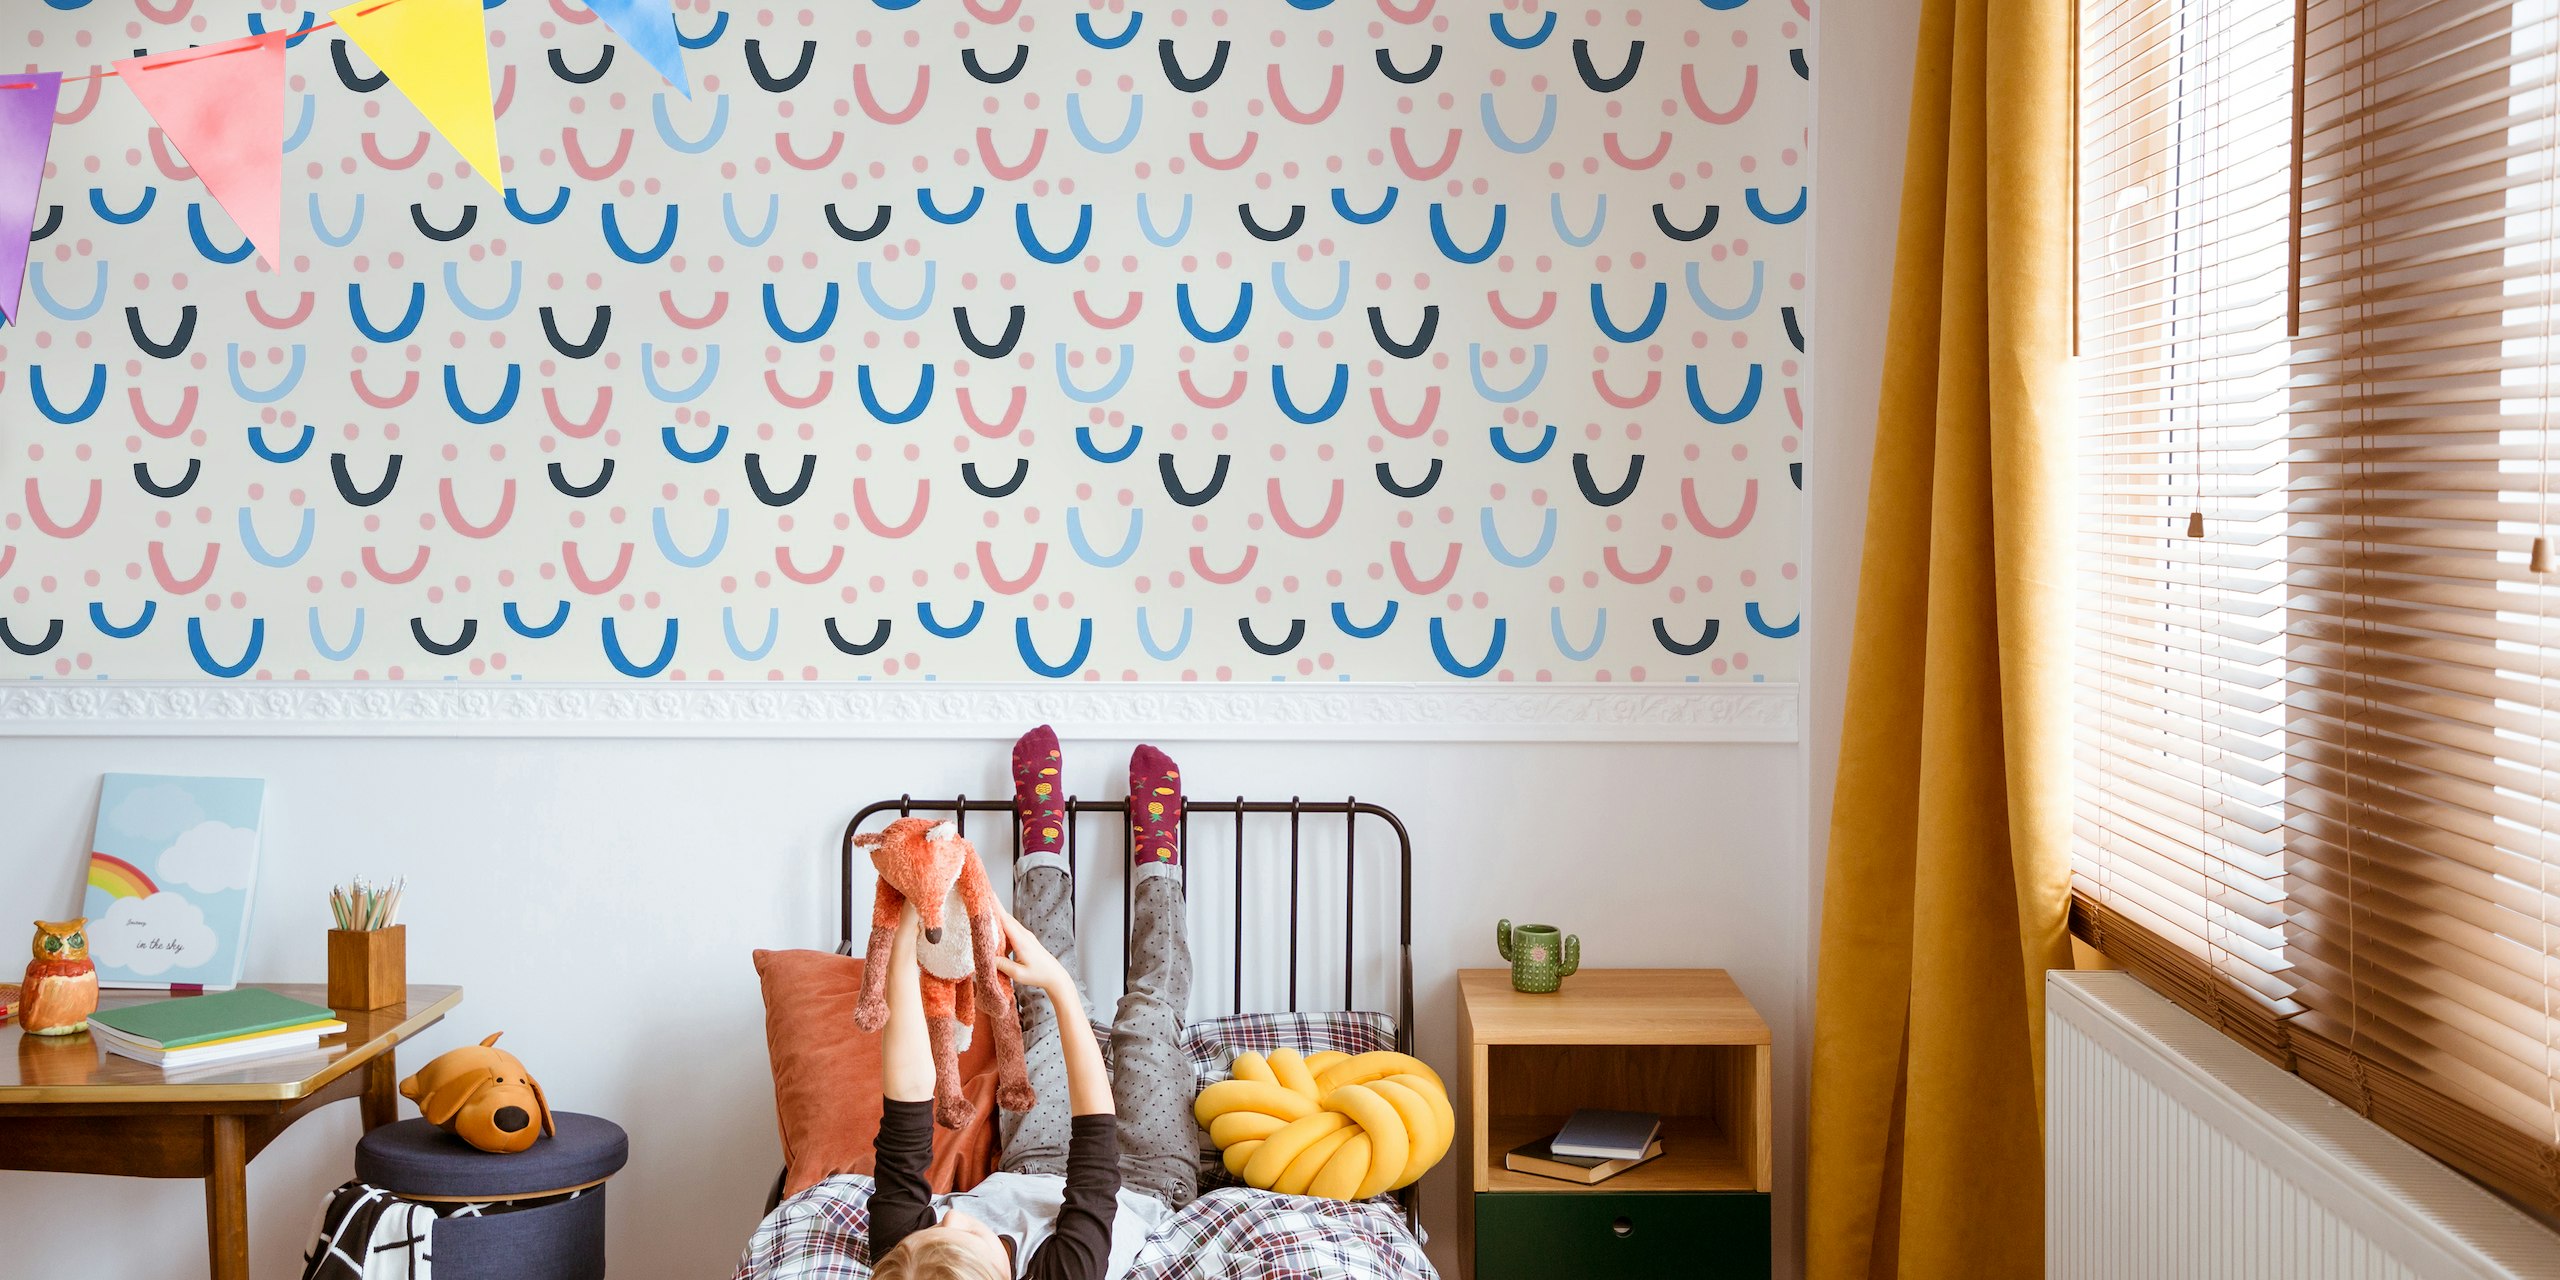 Smiling faces and polka dots pattern wall mural in pastel shades of pink and blue